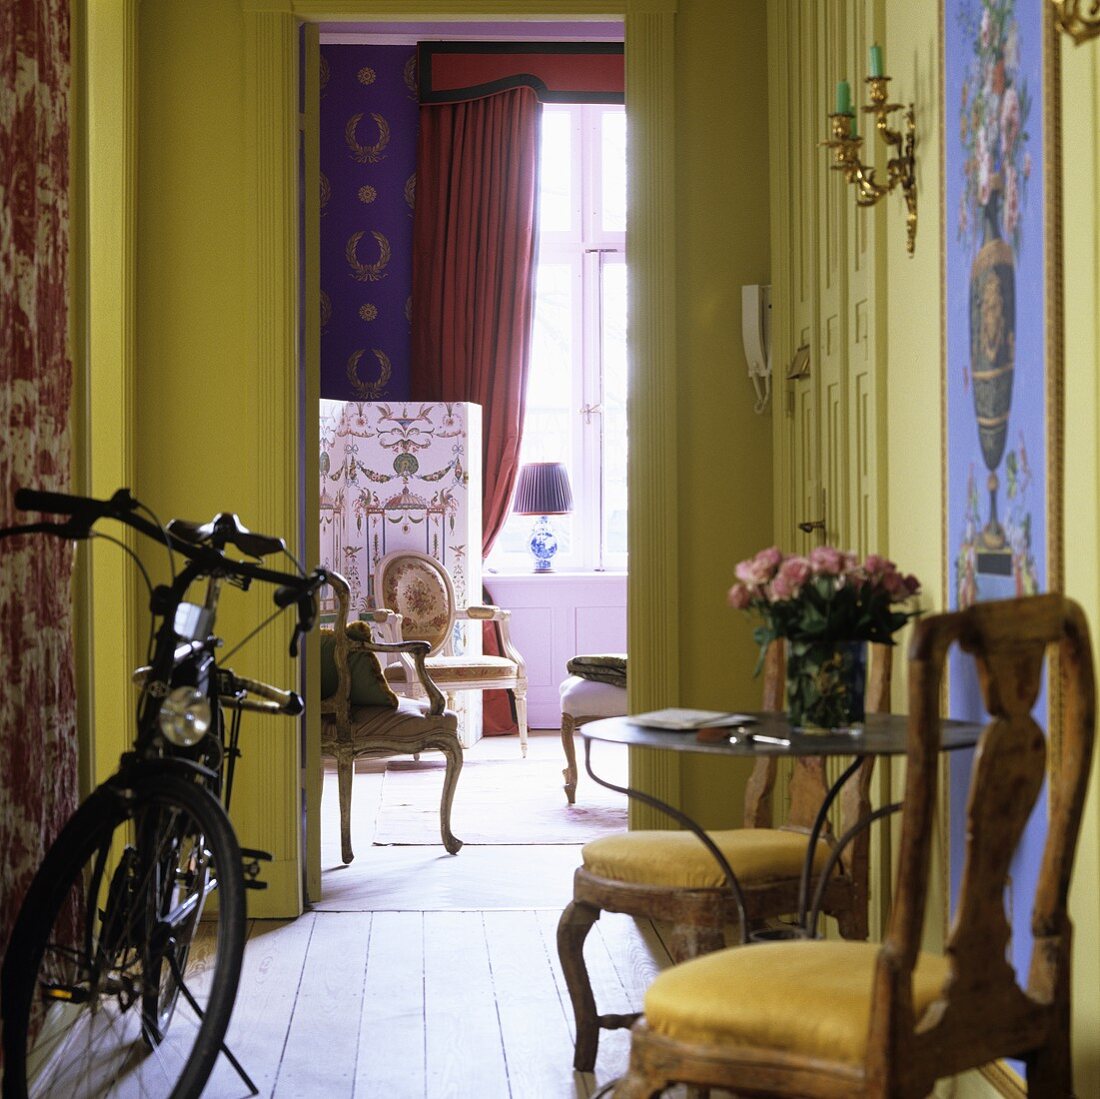 A bicycle parked in a hallway and an open door with a view of the living room